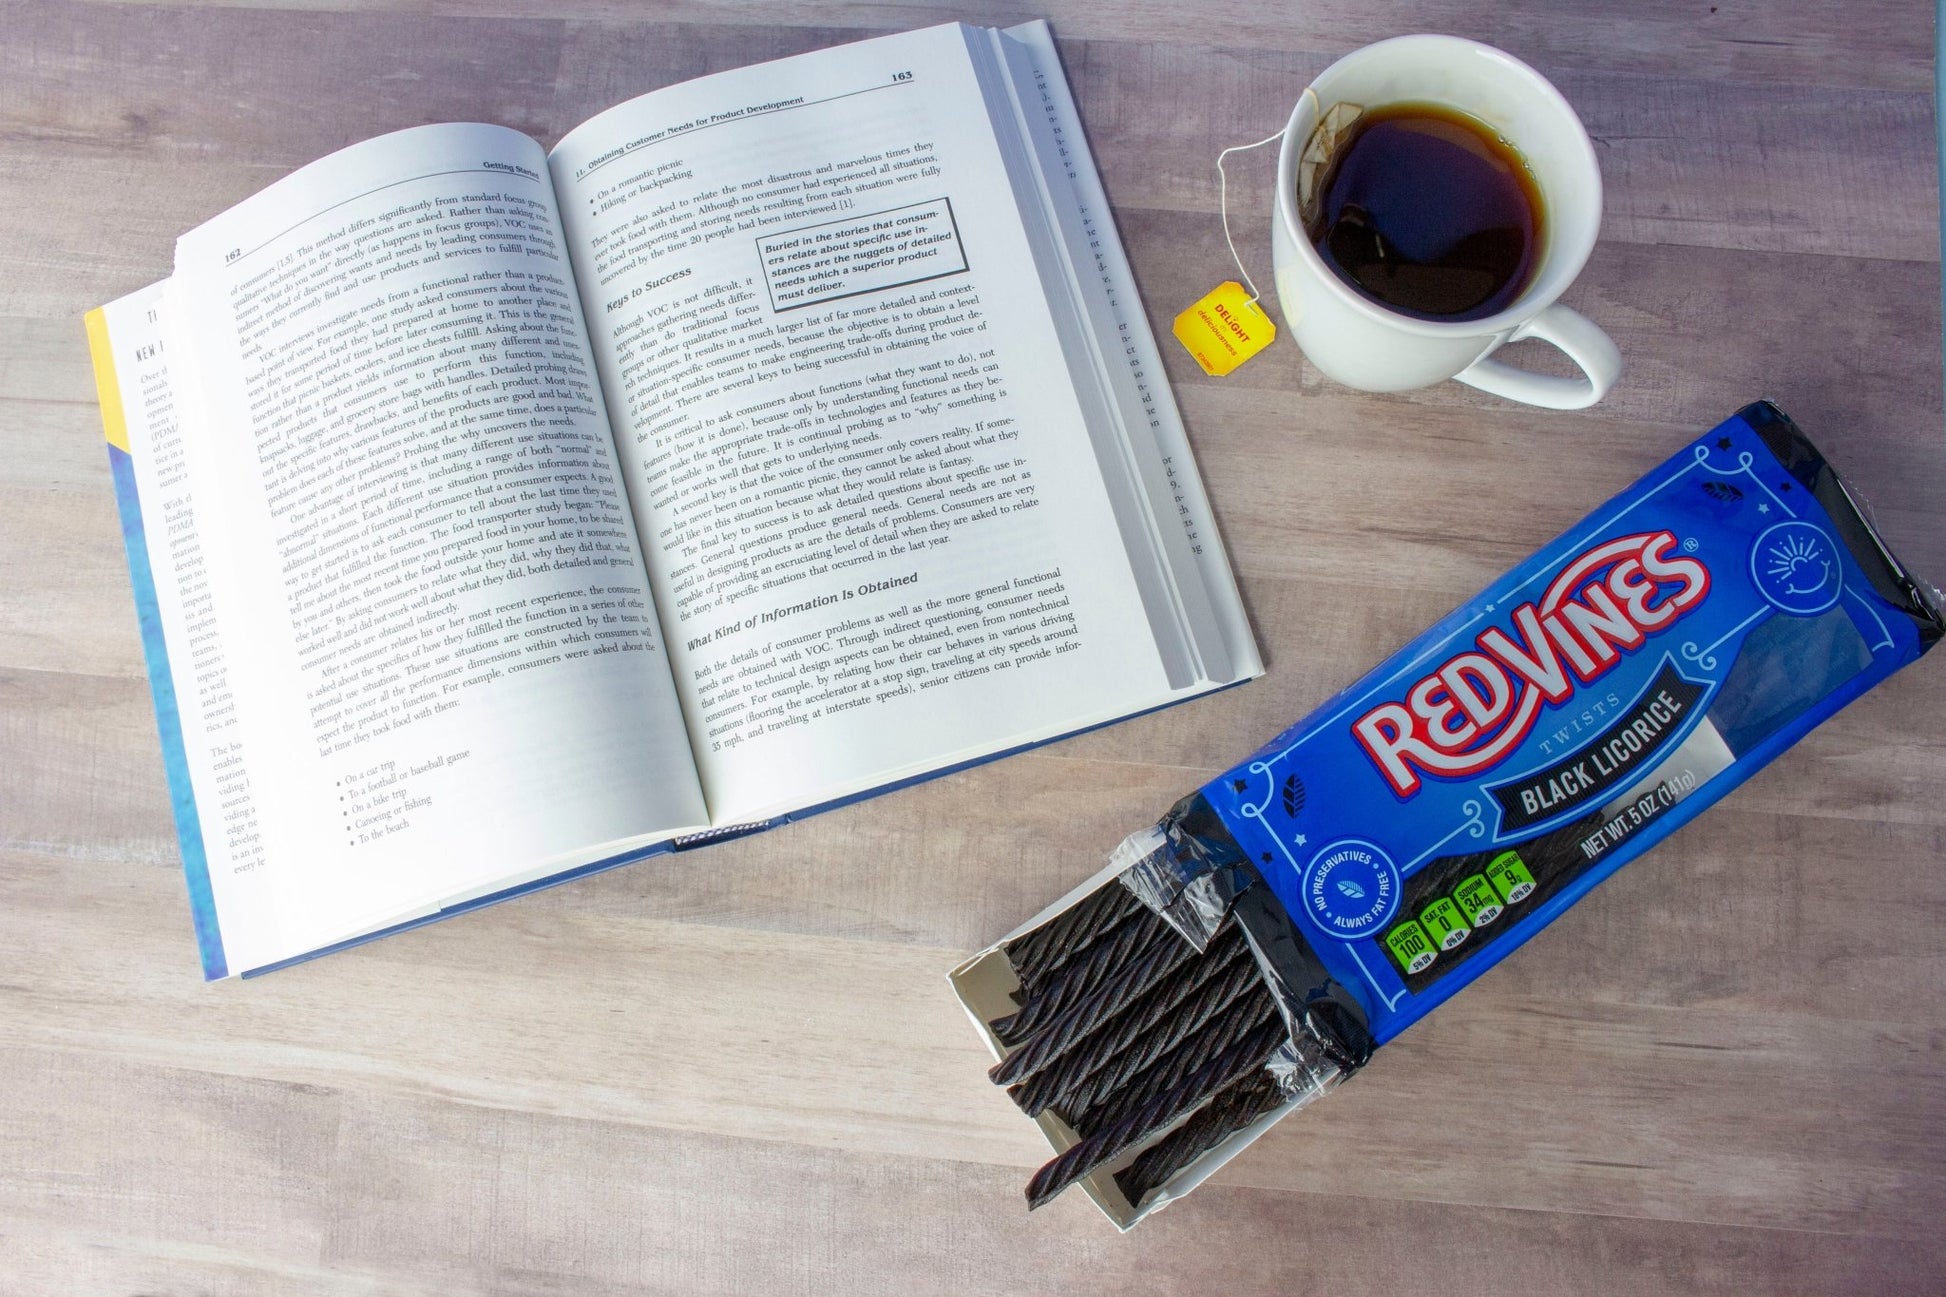 Enjoying a tray of Red Vines Black Licorice with tea and a good book